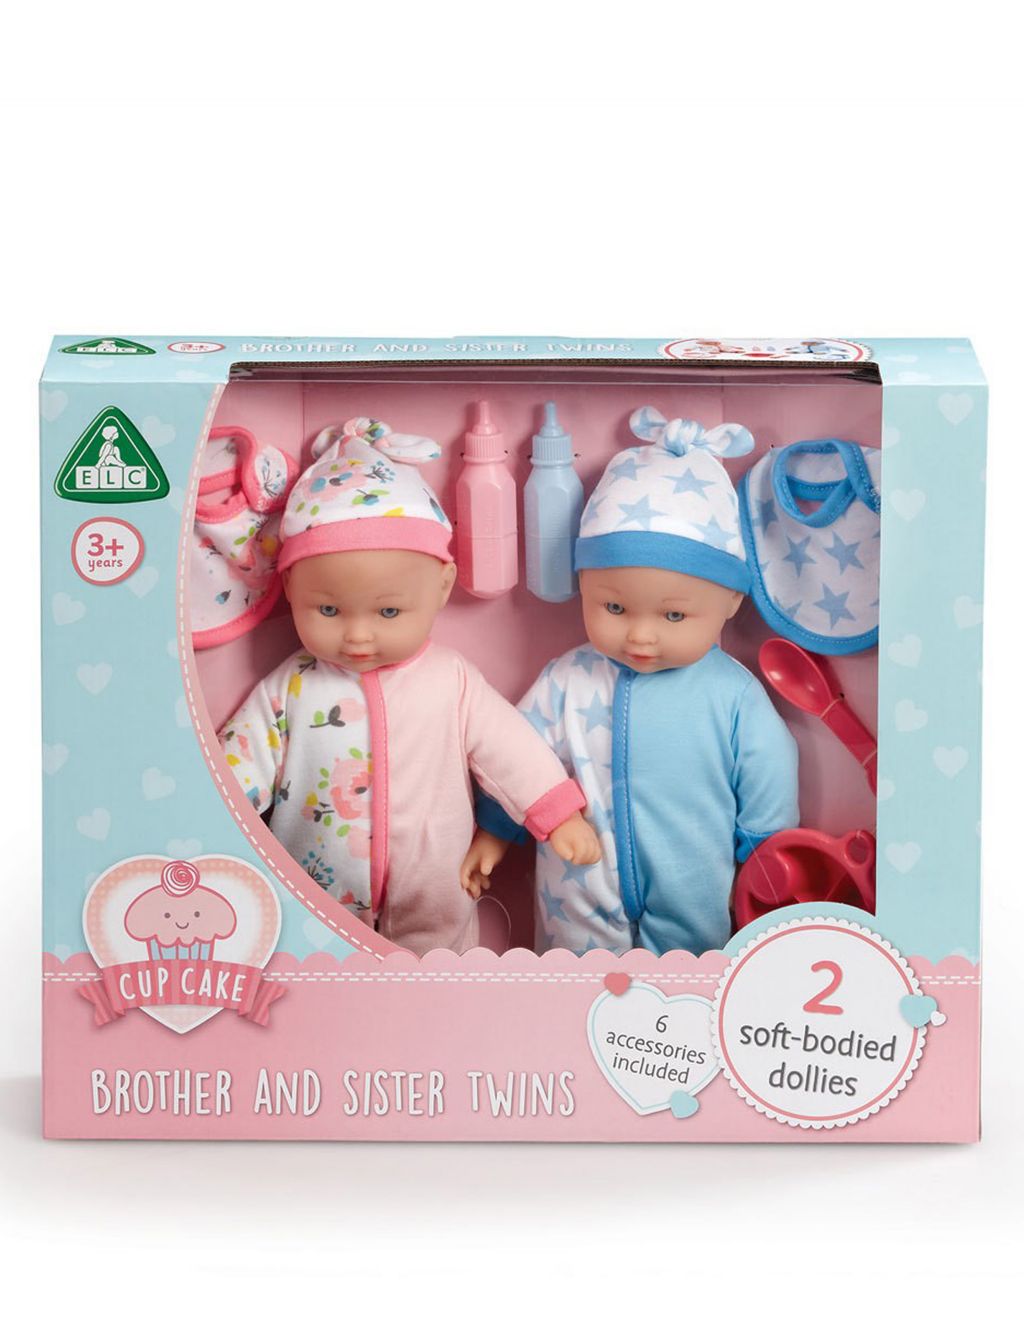 Cupcake Brother and Sister Twin Dolls (3+ Yrs) image 2